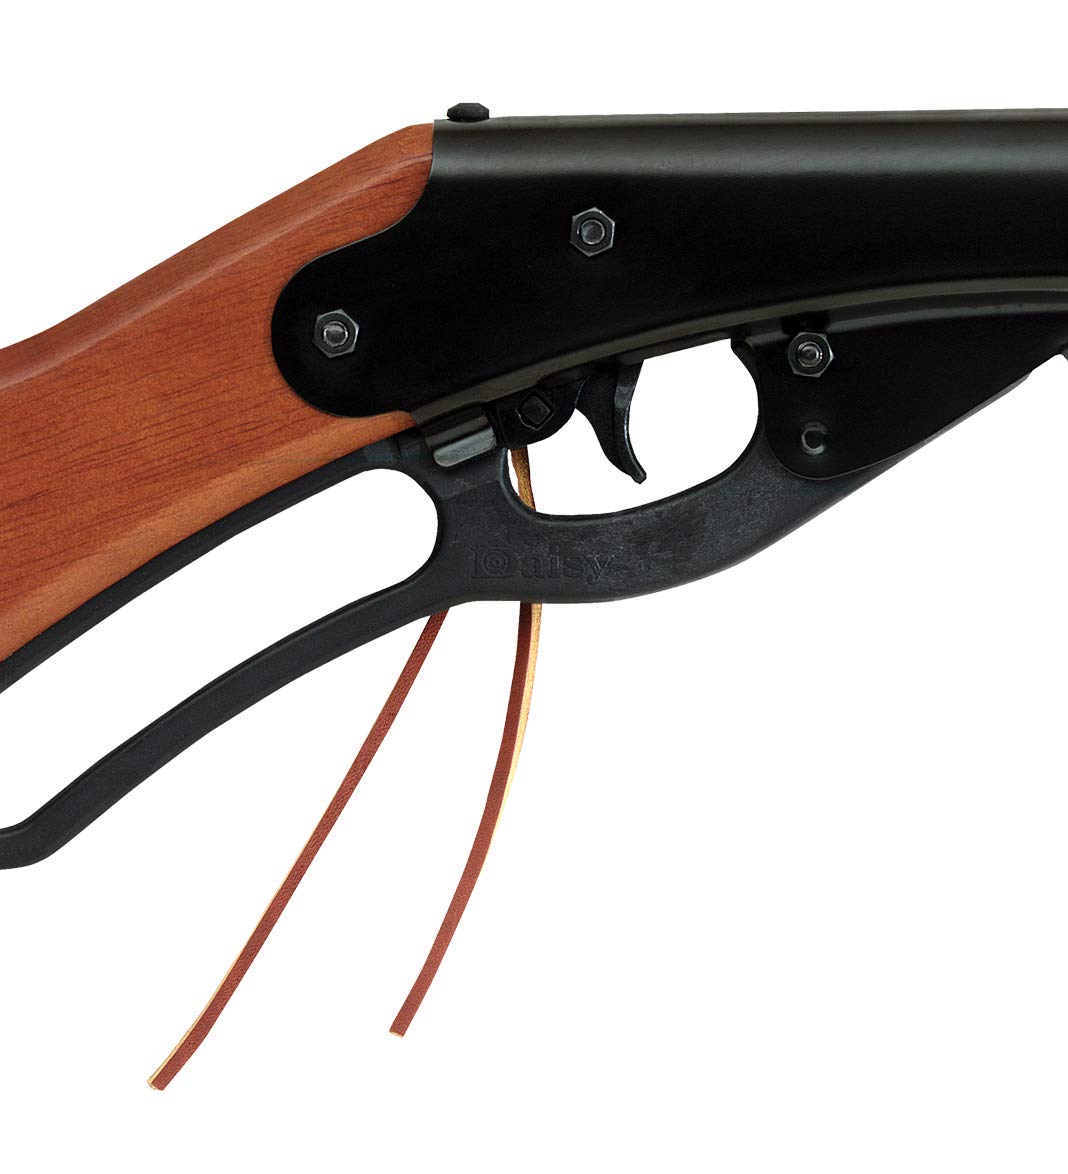 Daisy Outdoor Products Model 1938 Red Ryder BB Gun, Wood Grain, Overall Length: 35.4 Inch